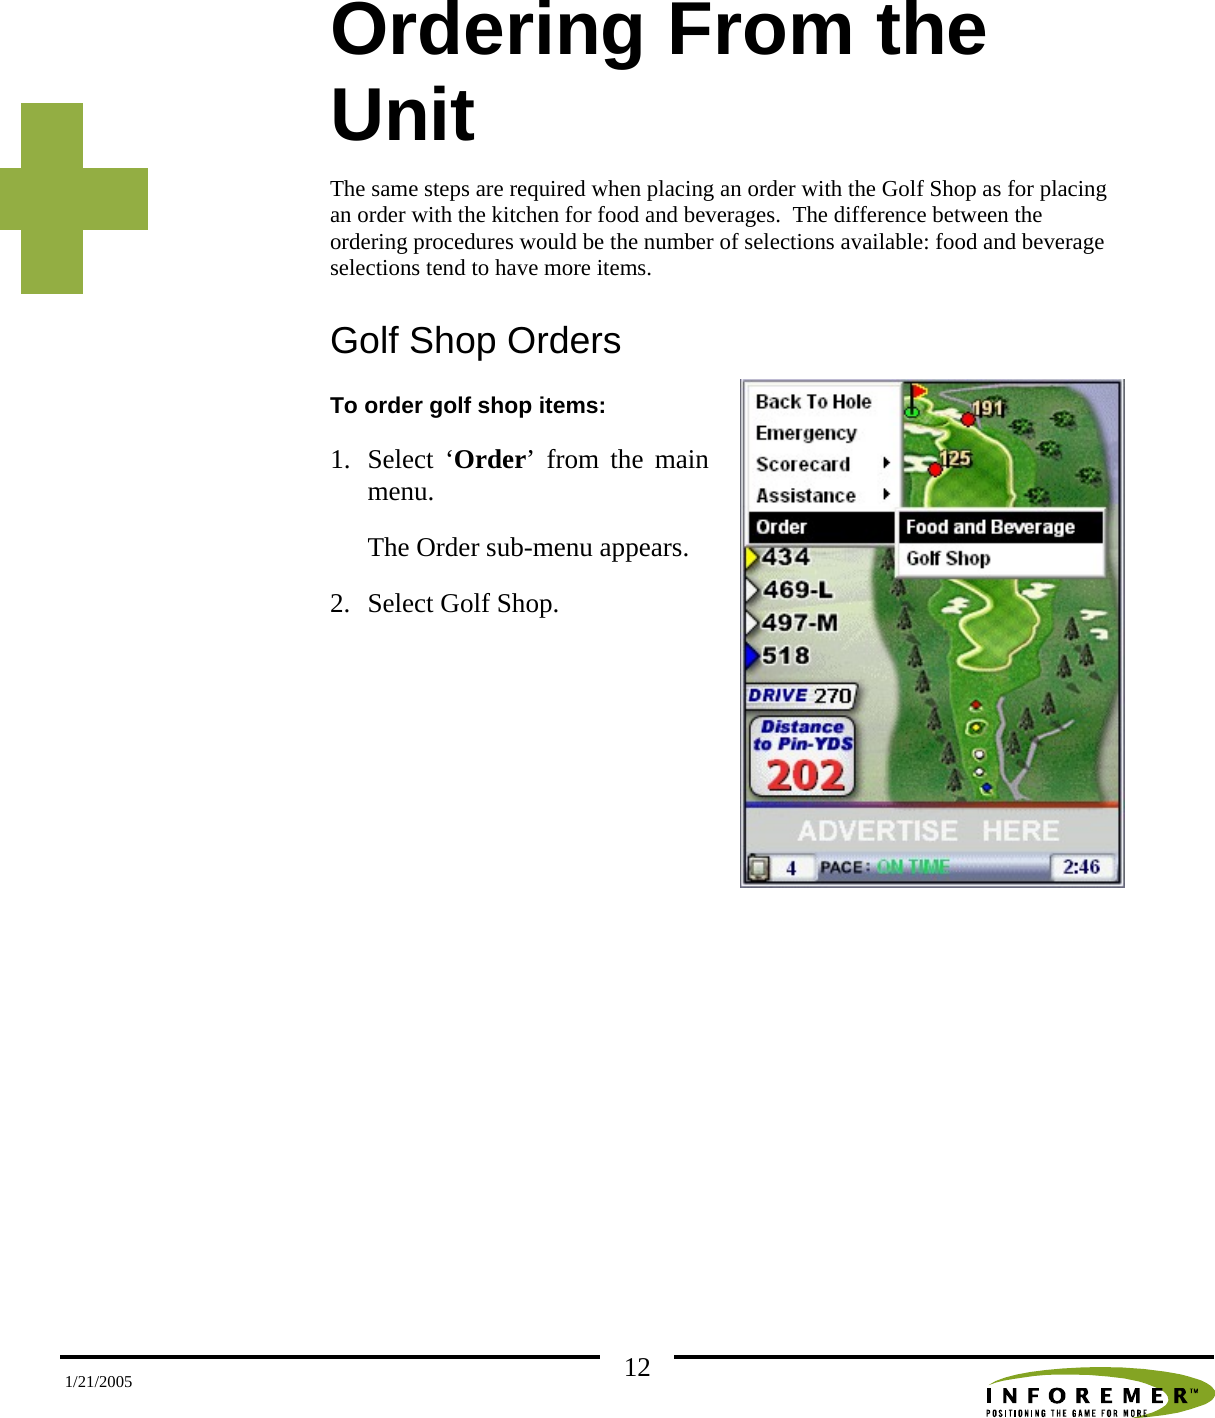   121/21/2005 Ordering From the Unit The same steps are required when placing an order with the Golf Shop as for placing an order with the kitchen for food and beverages.  The difference between the ordering procedures would be the number of selections available: food and beverage selections tend to have more items. Golf Shop Orders To order golf shop items: 1. Select ‘Order’ from the main menu.   The Order sub-menu appears. 2. Select Golf Shop.    